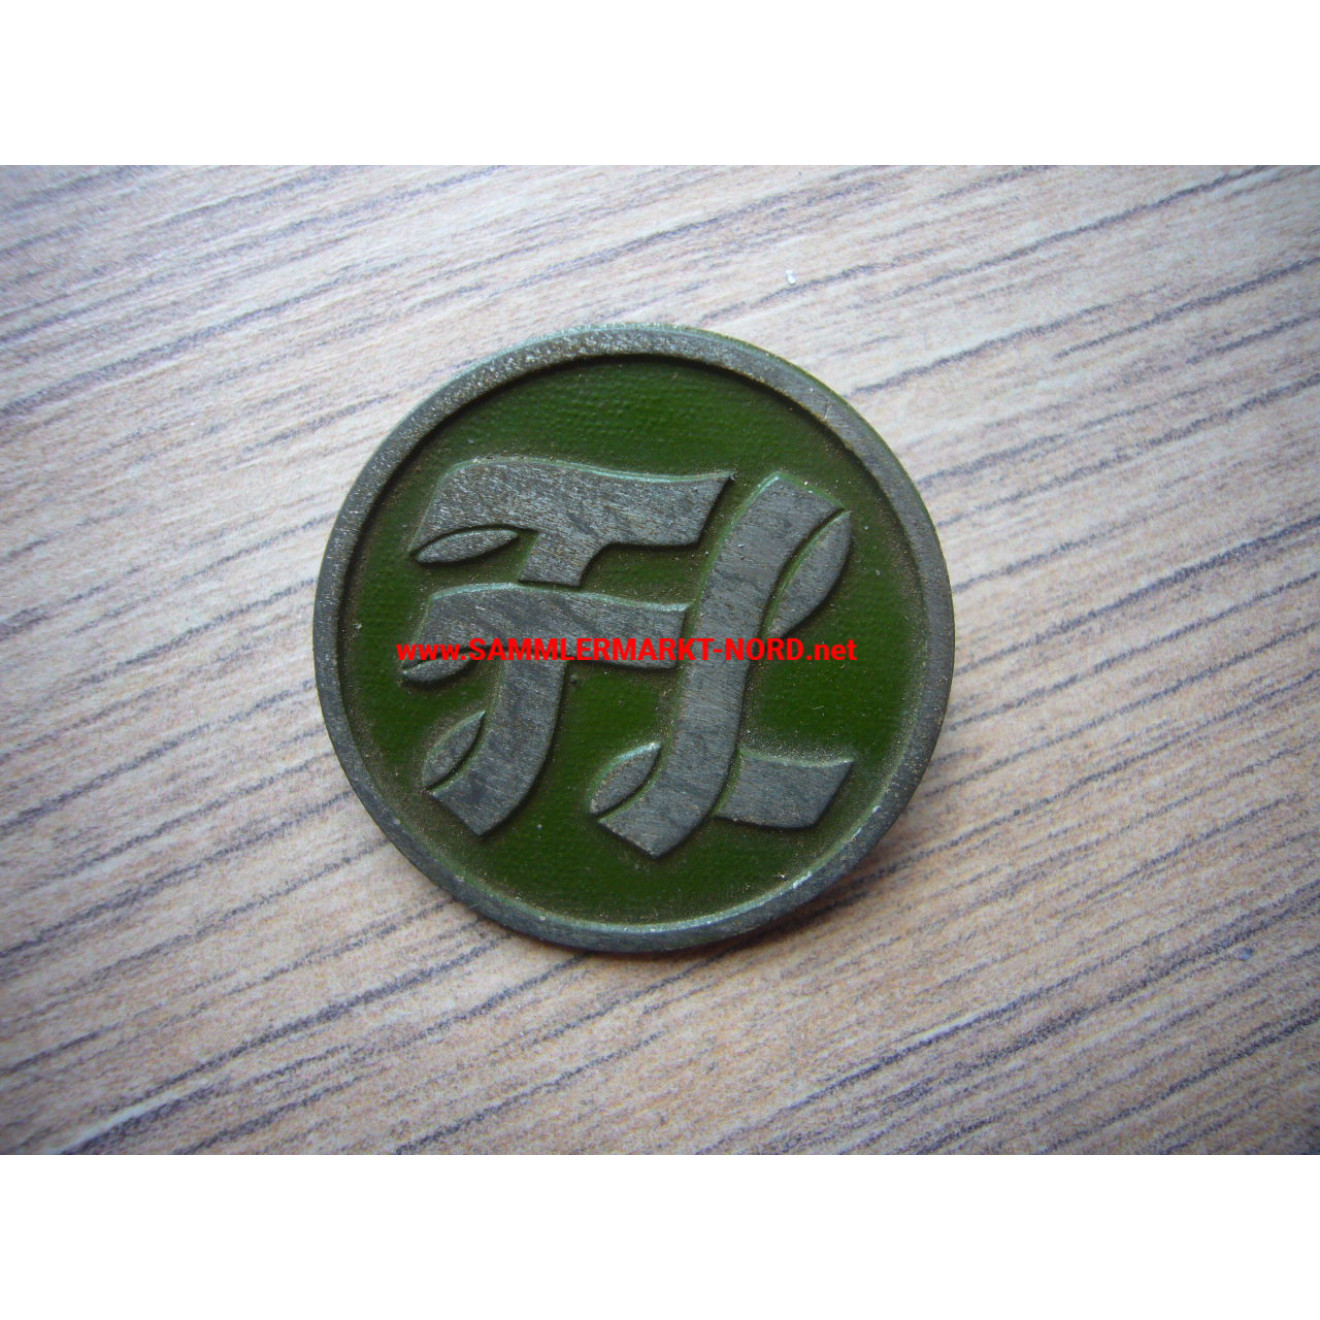 FAHLBERG-LIST company, Magdeburg - armaments factory - identity badge for employees (green)